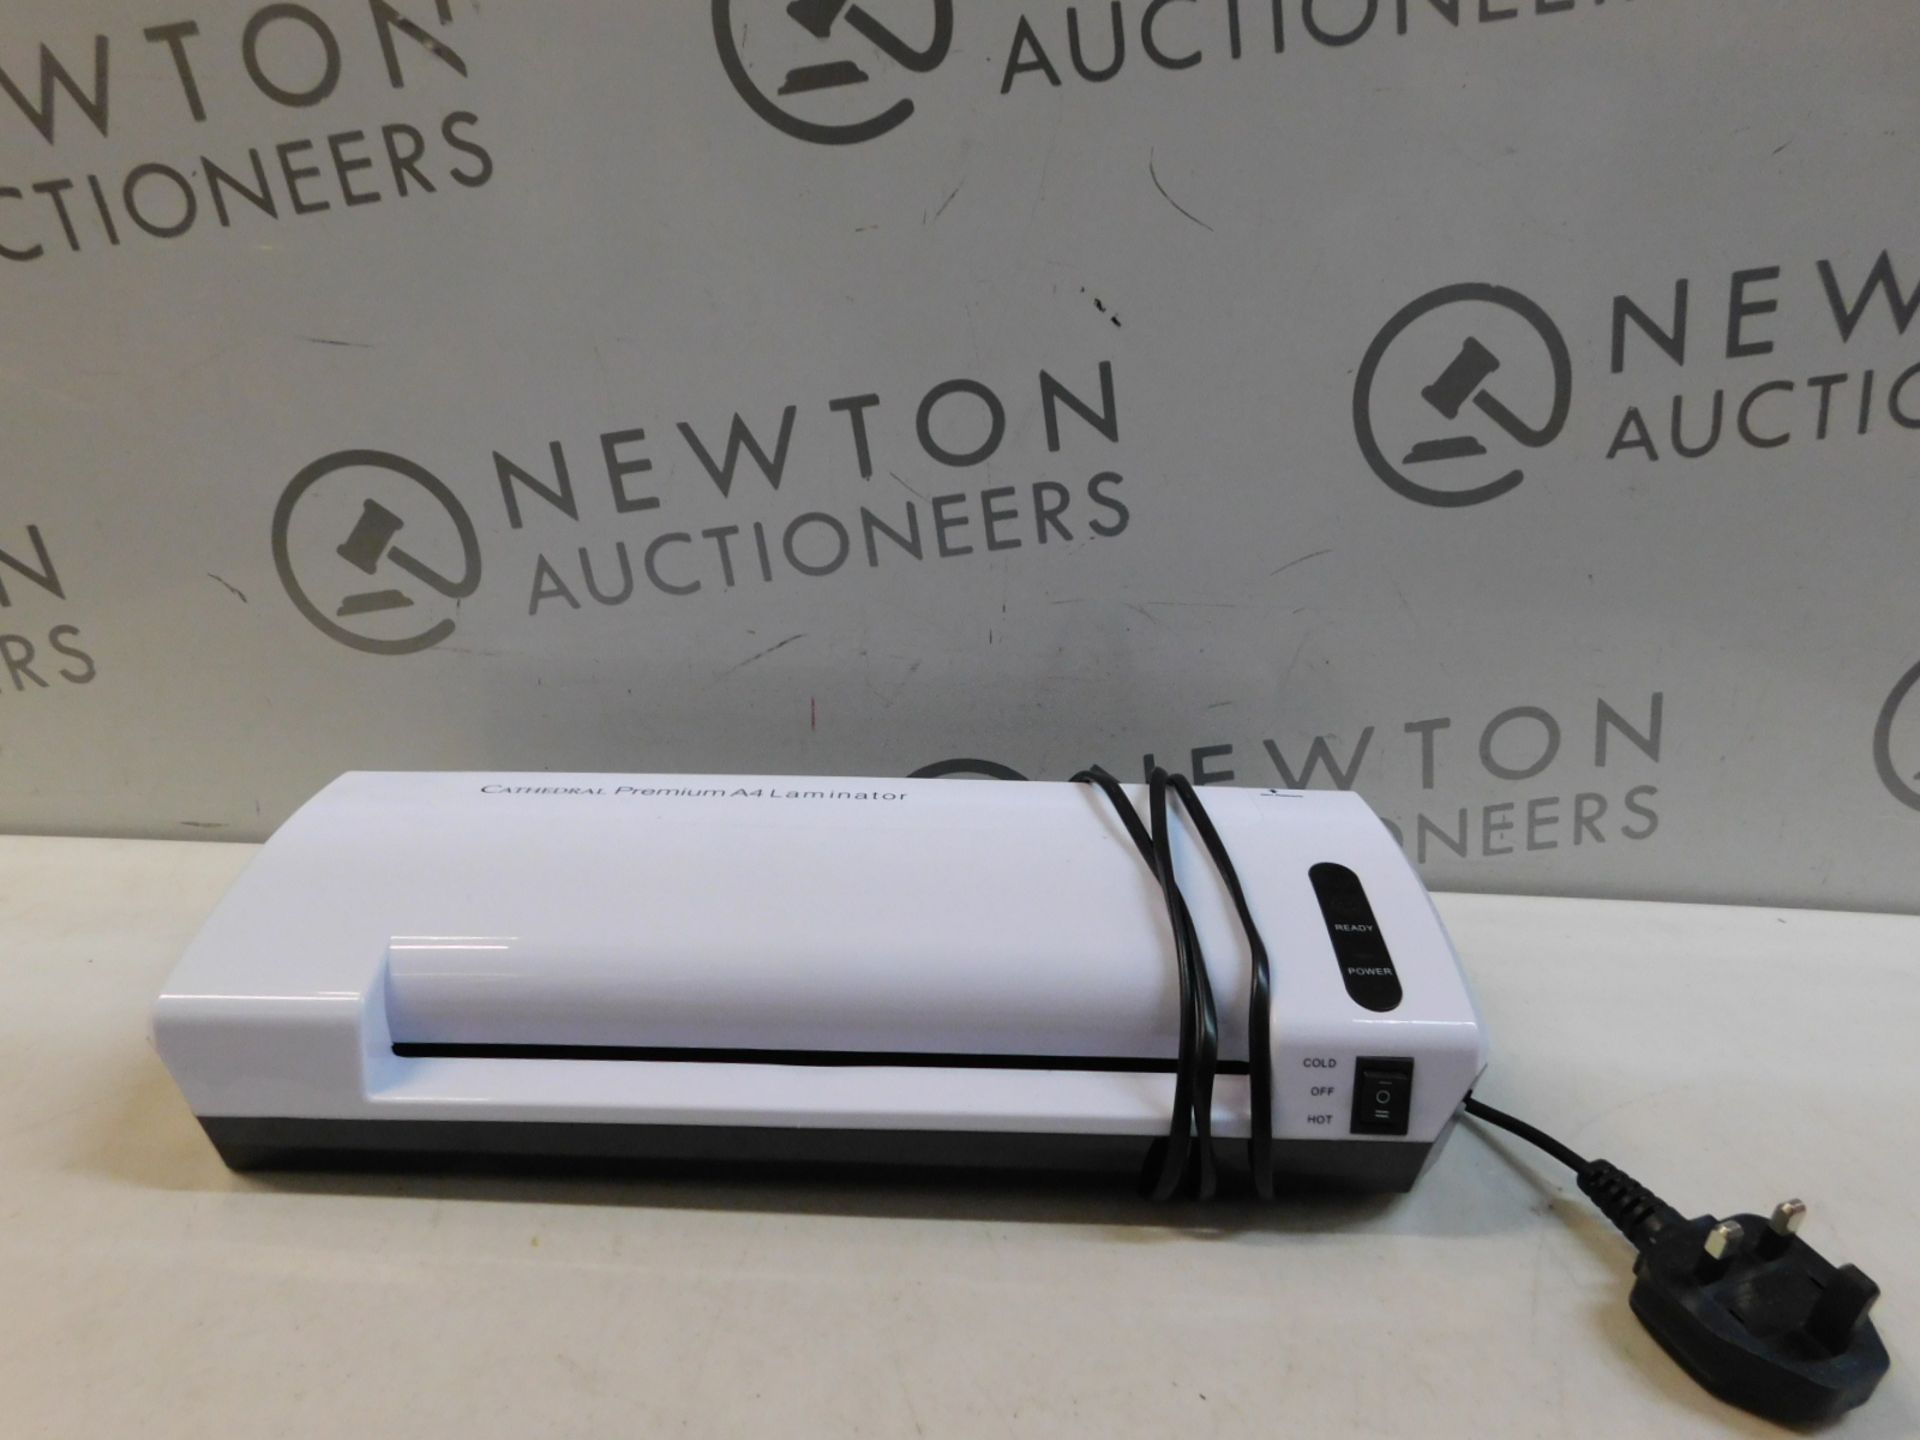 1 CATHEDRAL TIMESAVER PROFESSIONAL A4 LAMINATOR RRP £64.99